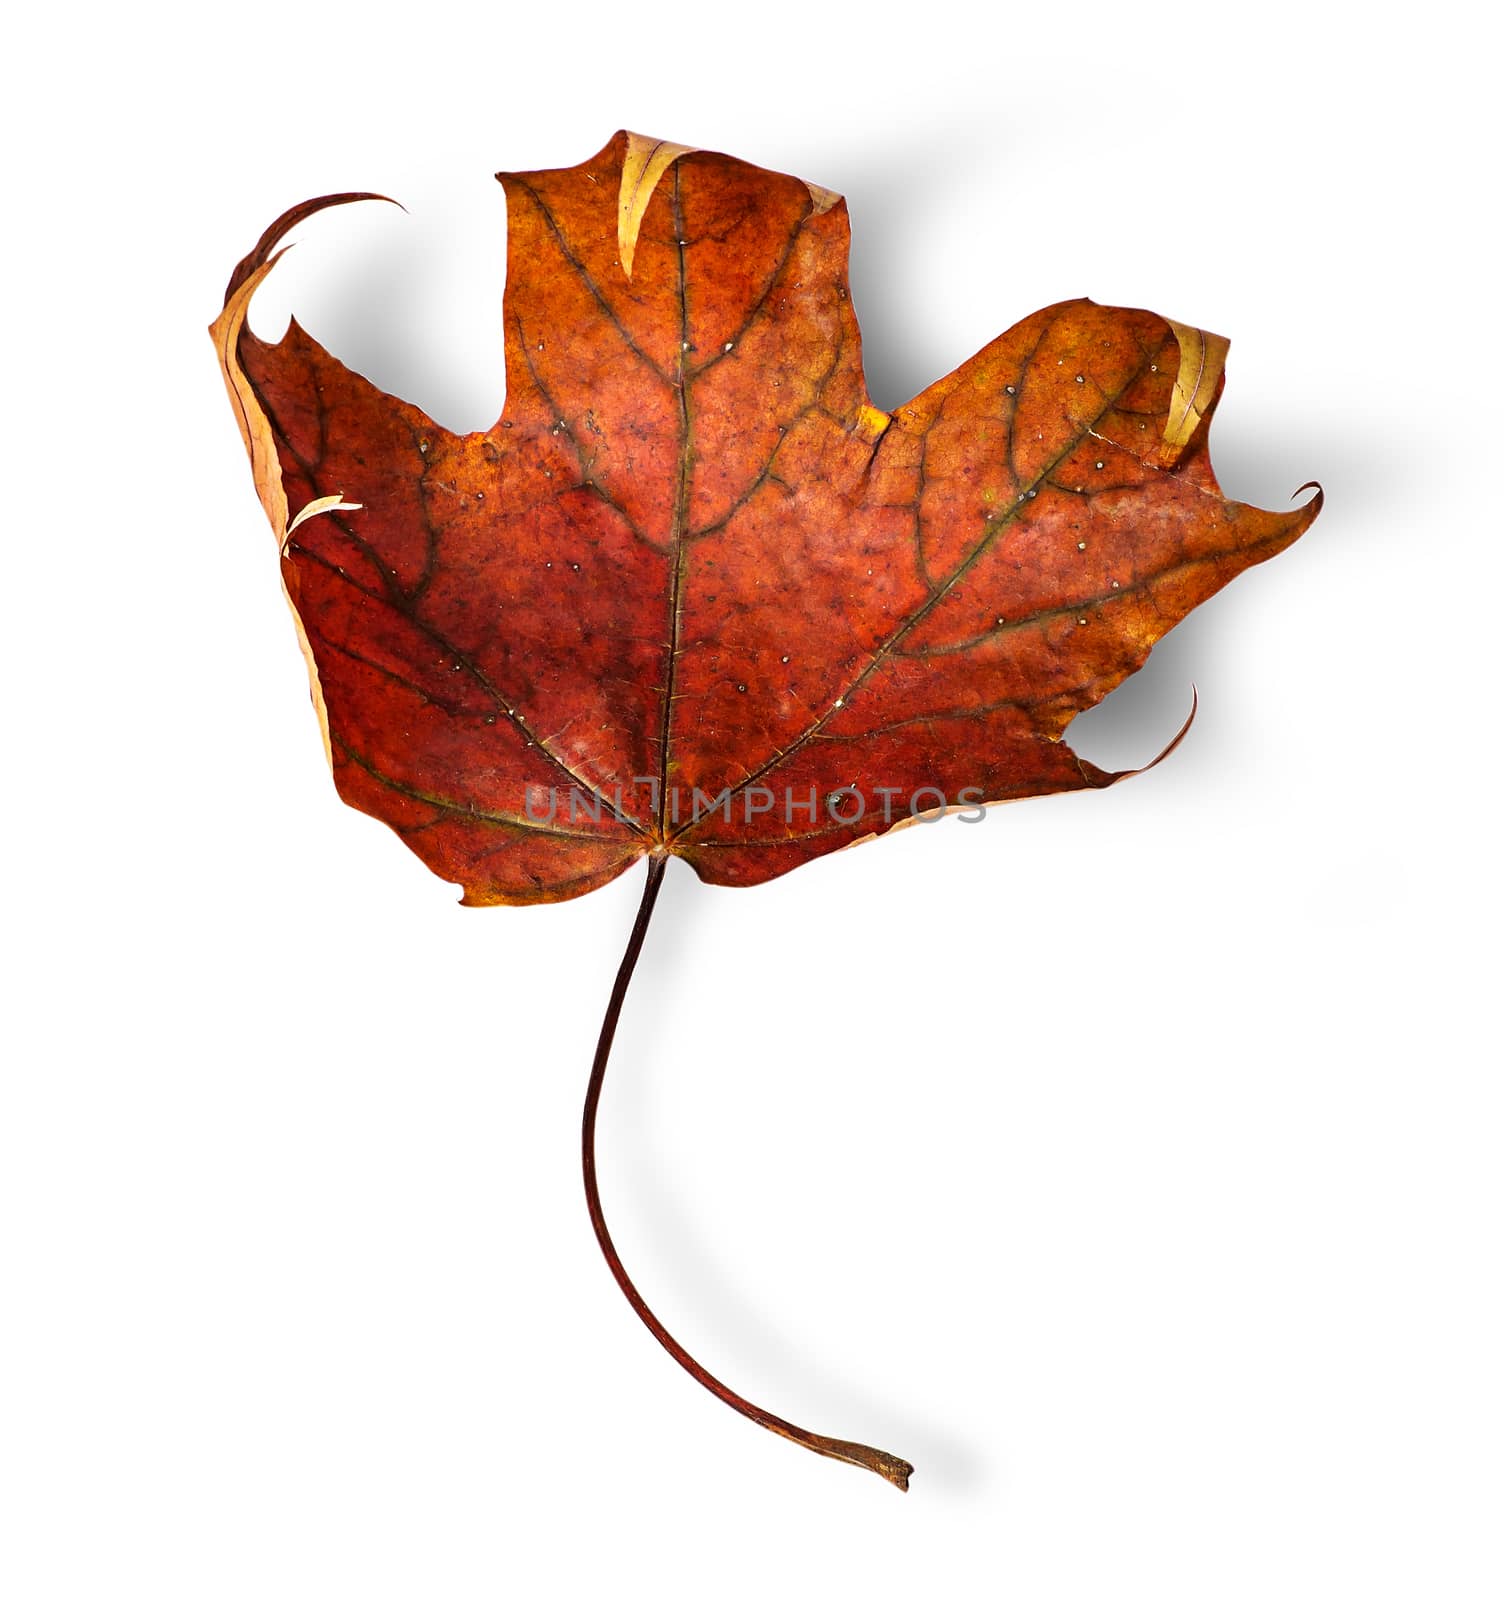 Dry maple leaf with curled edges vertically by Cipariss